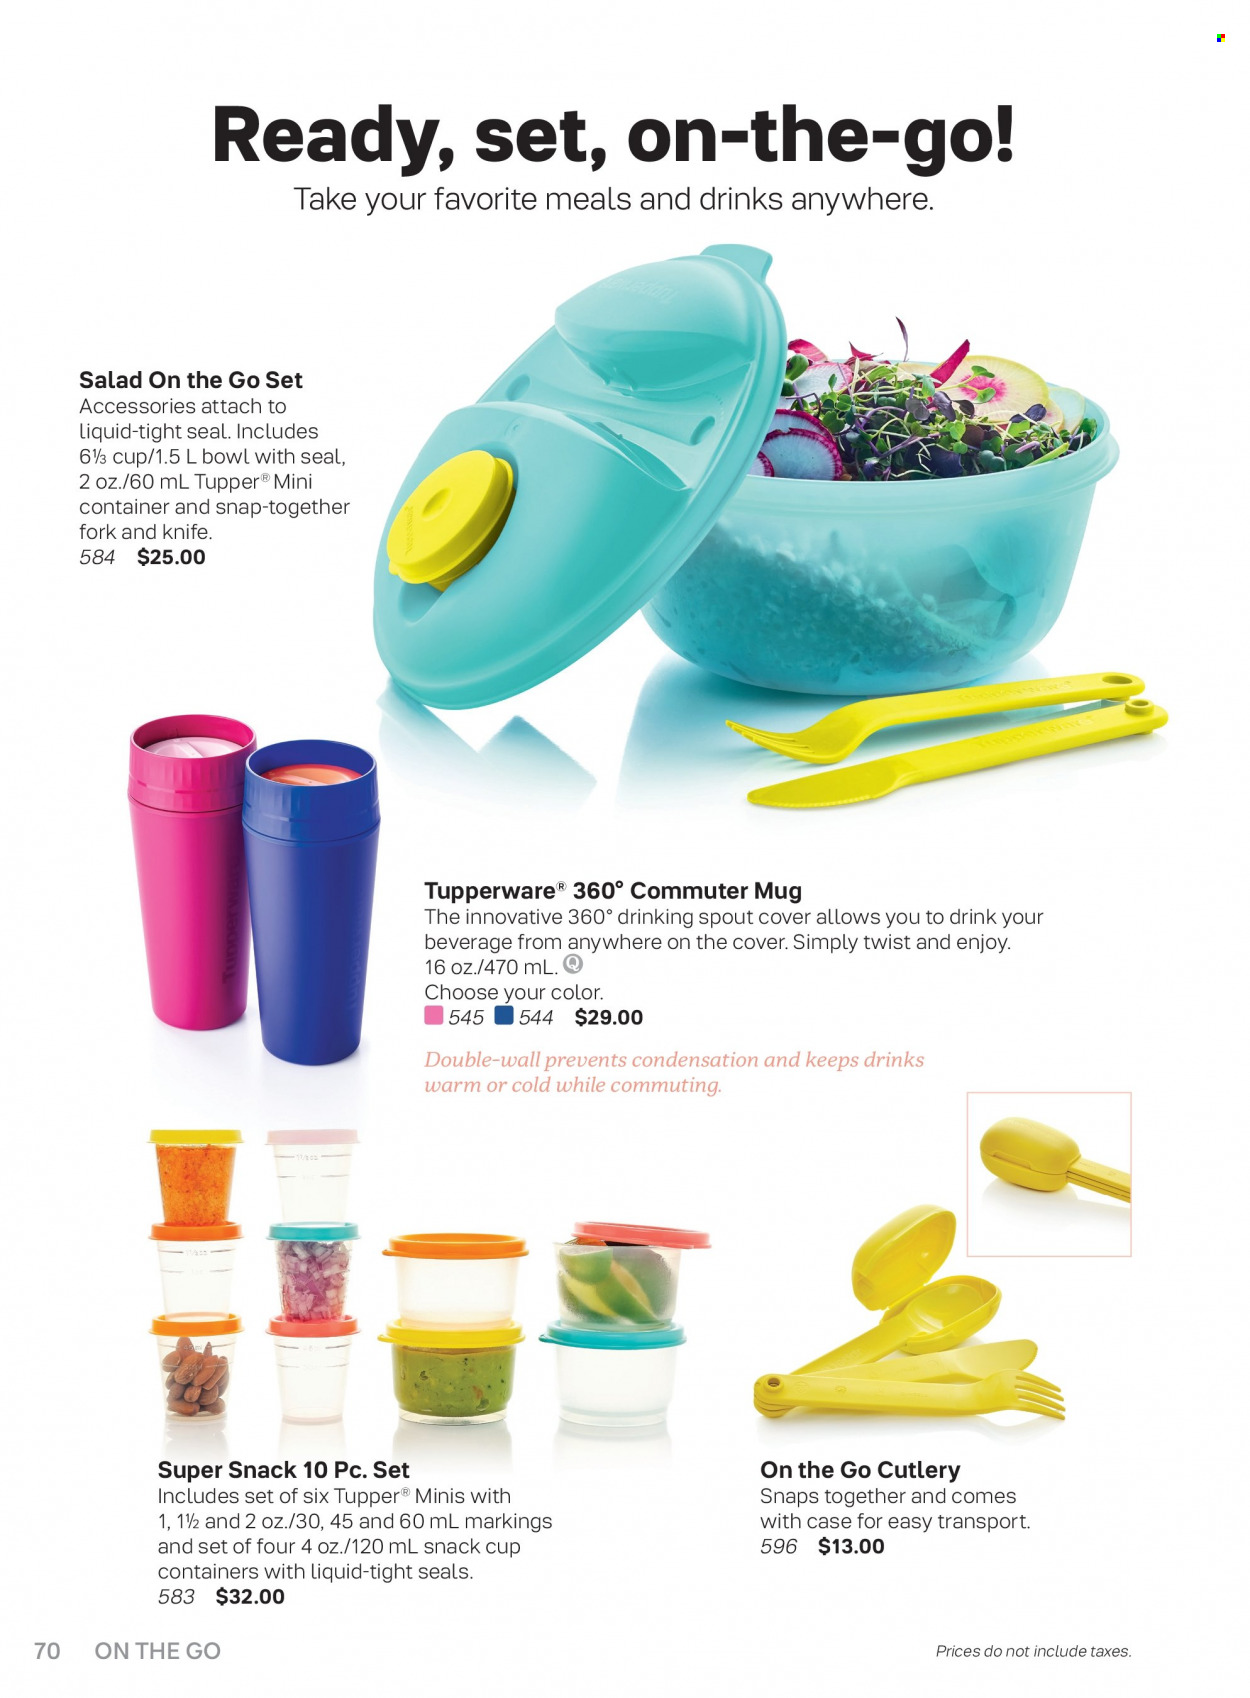 Tupperware flyer . Page 70.